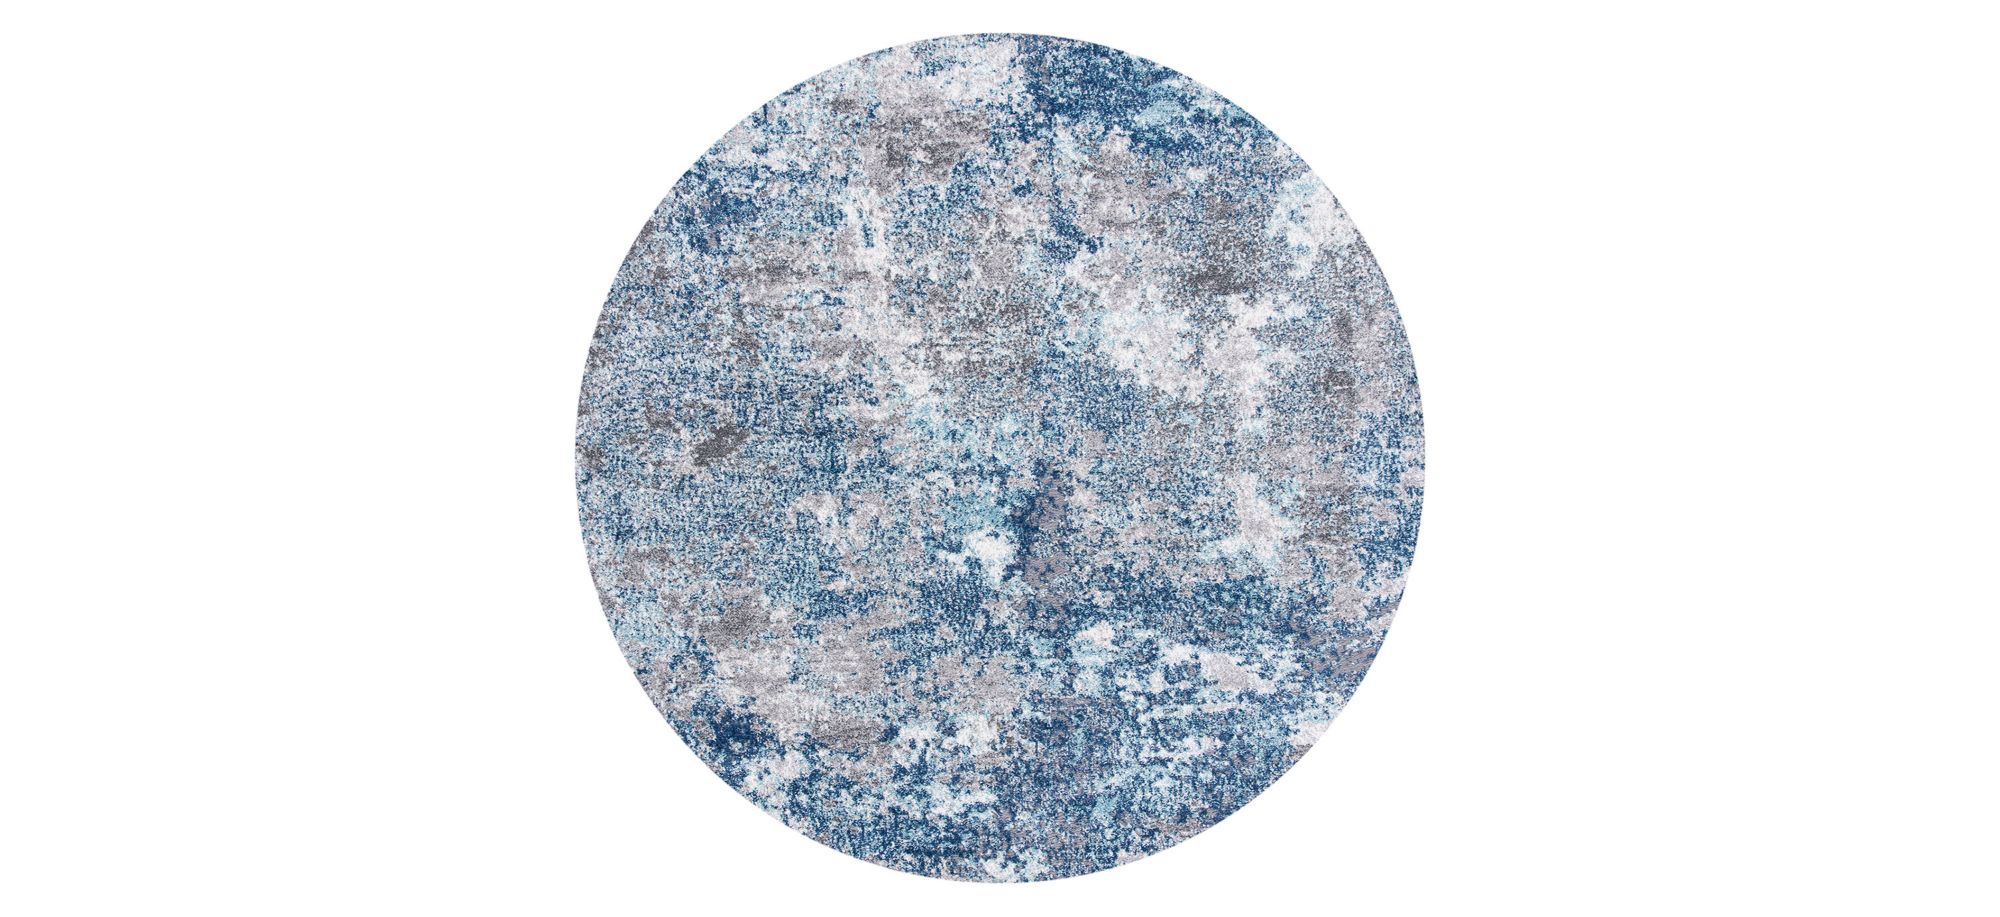 Iommi Area Rug in Navy & Gray by Safavieh